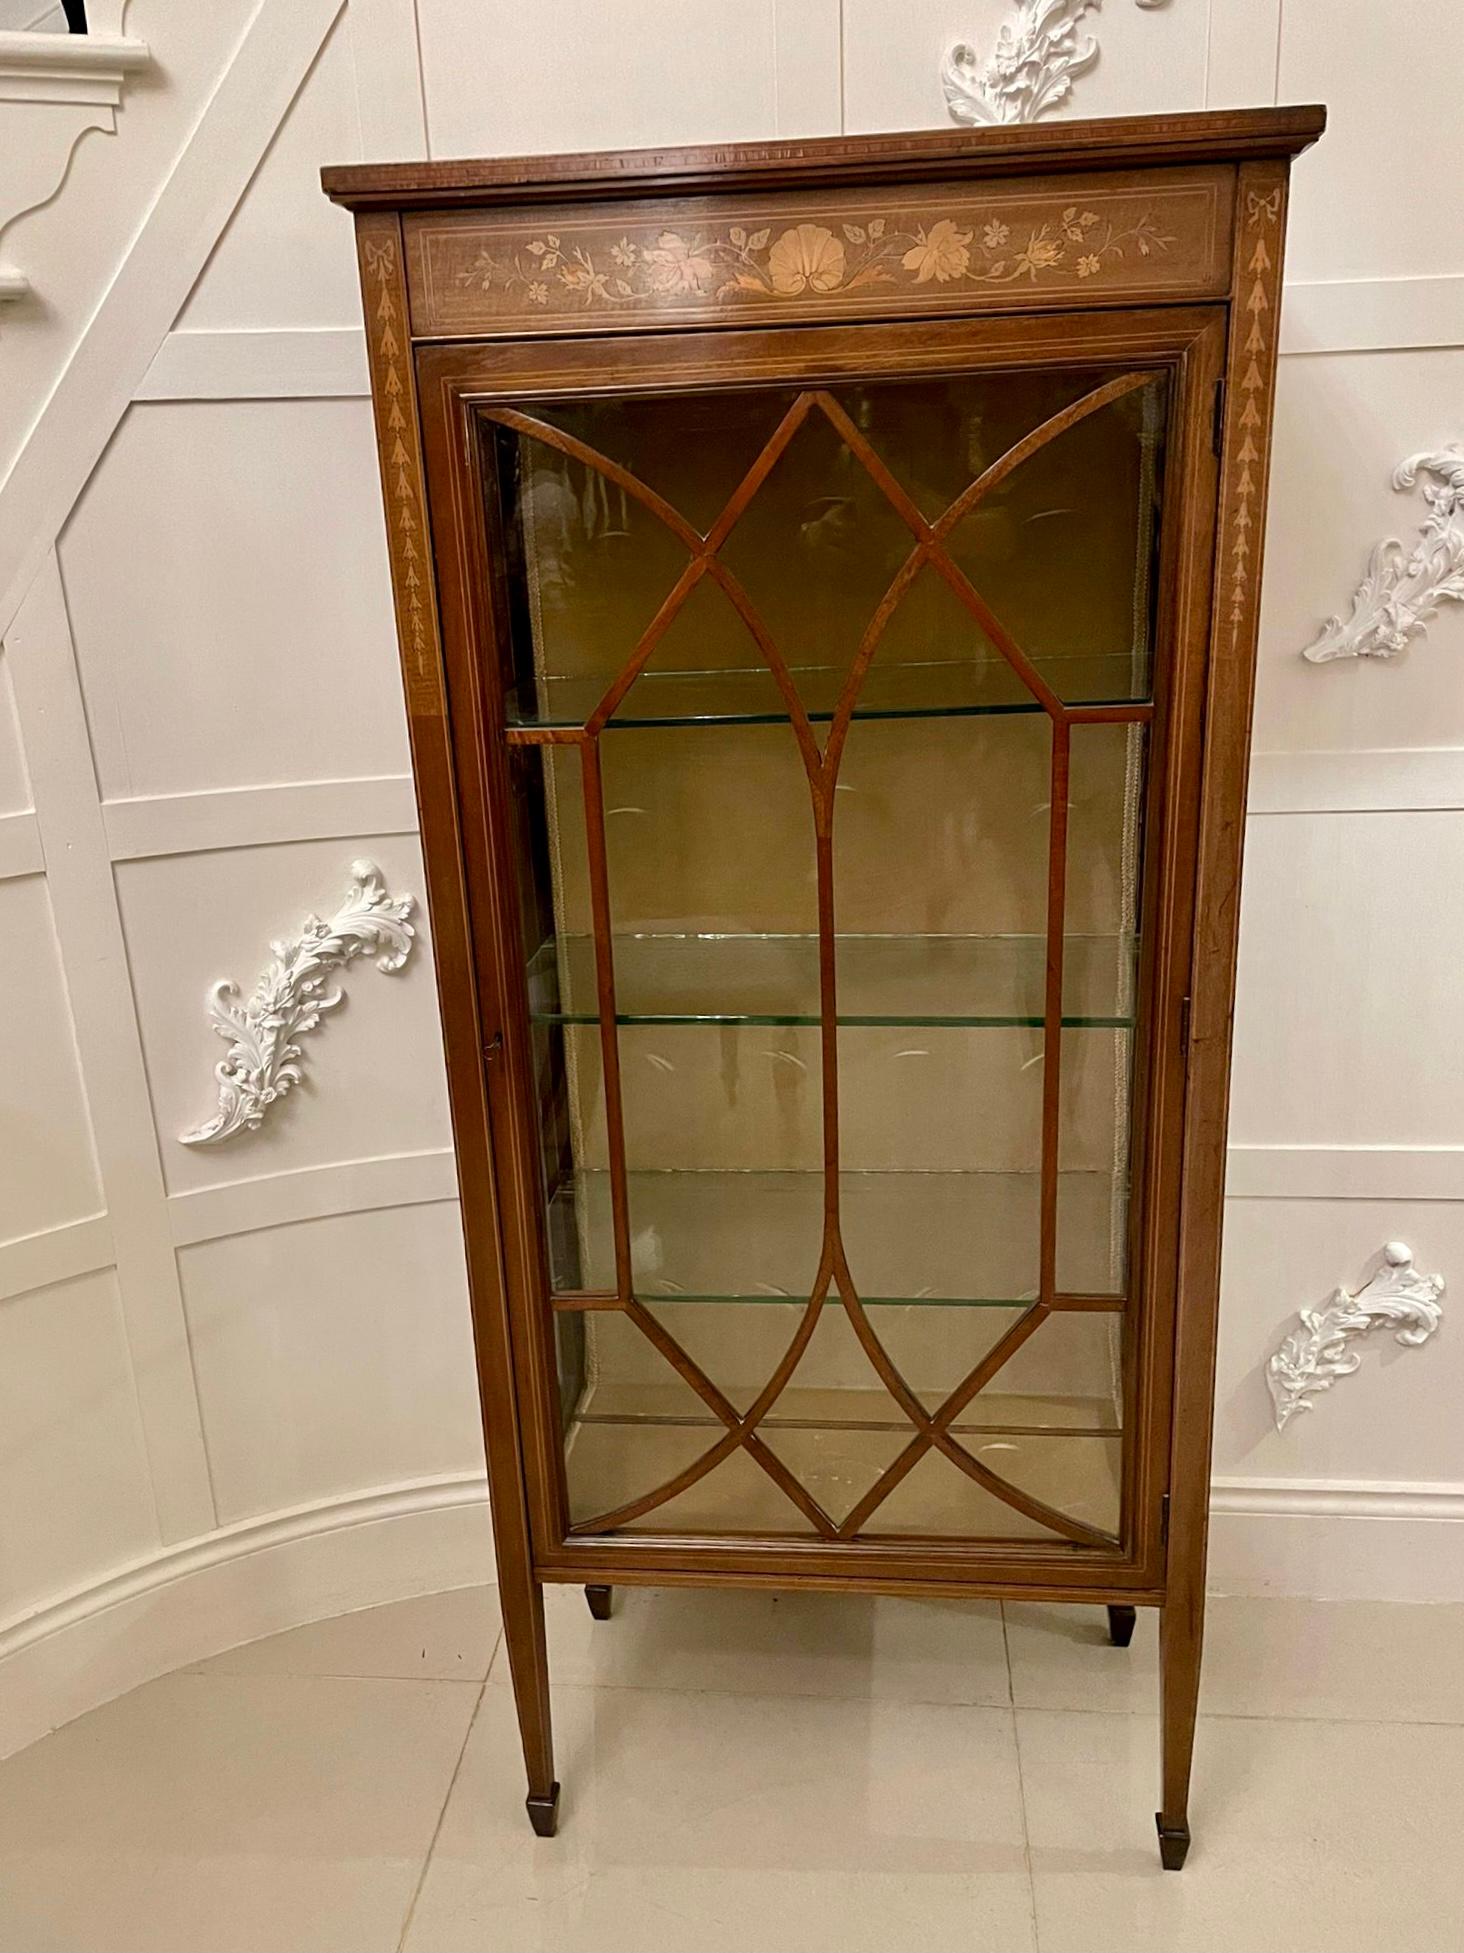 Antique Edwardian quality mahogany marquetry inlaid display cabinet having a polished mahogany top above a quality pretty marquetry inlaid frieze, single astral glazed door opens to reveal three glass display shelves, satinwood inlaid stringing to